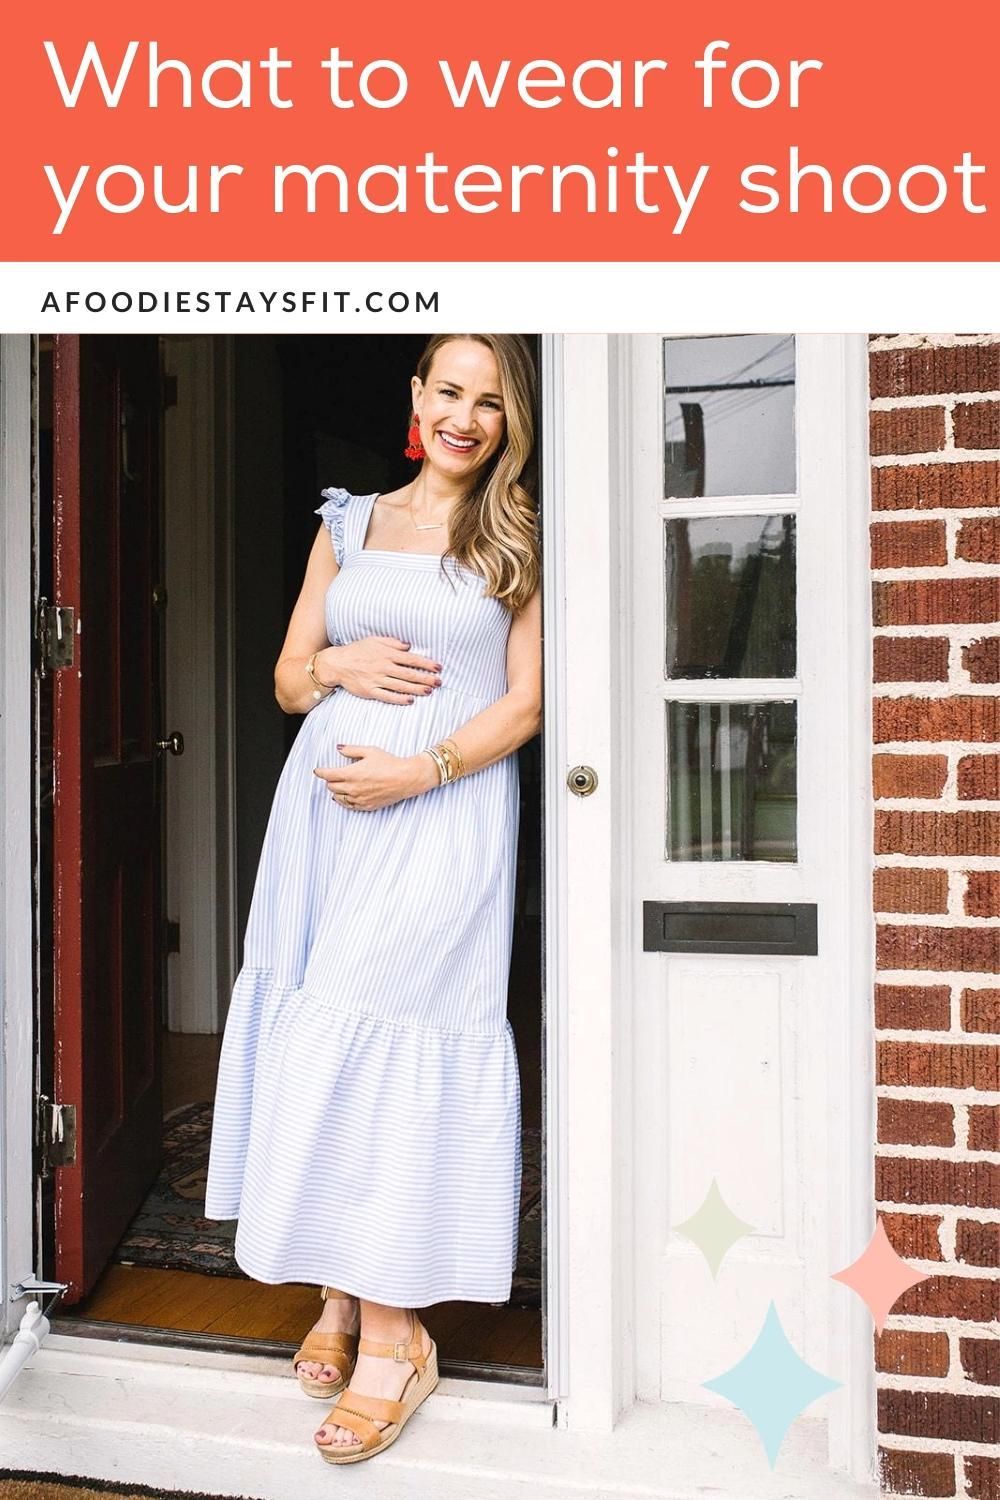 Why these outfits are really flattering on pregnant women during their maternity photoshoots - Why these outfits are really flattering on pregnant women during their maternity photoshoots -   18 beauty Shoot outfit ideas